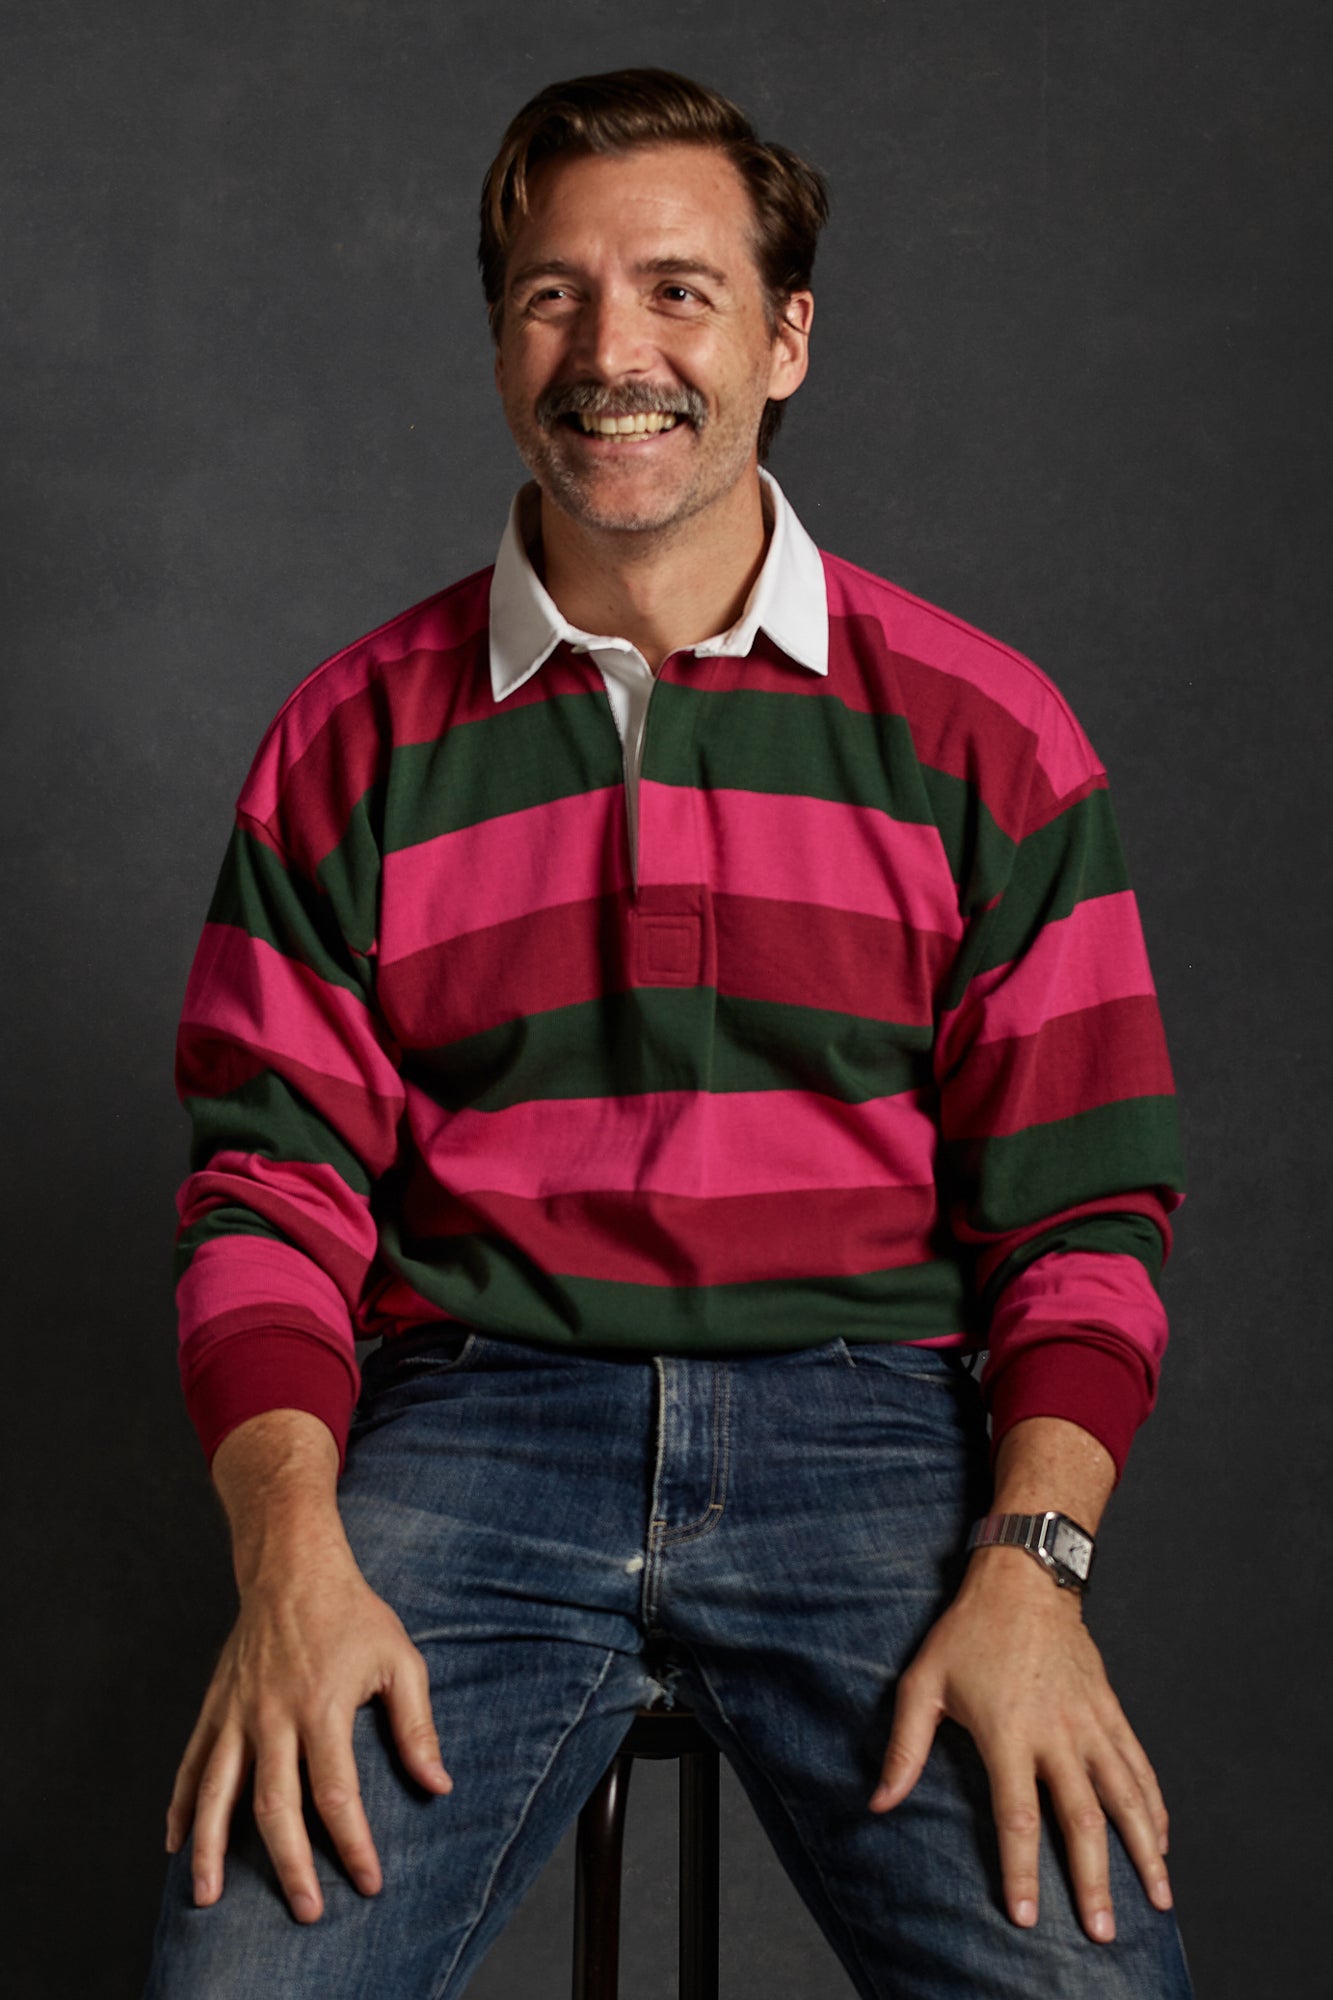 Patrick Grant wearing unisex striped rugby shirt maroon, bottle green, cerise